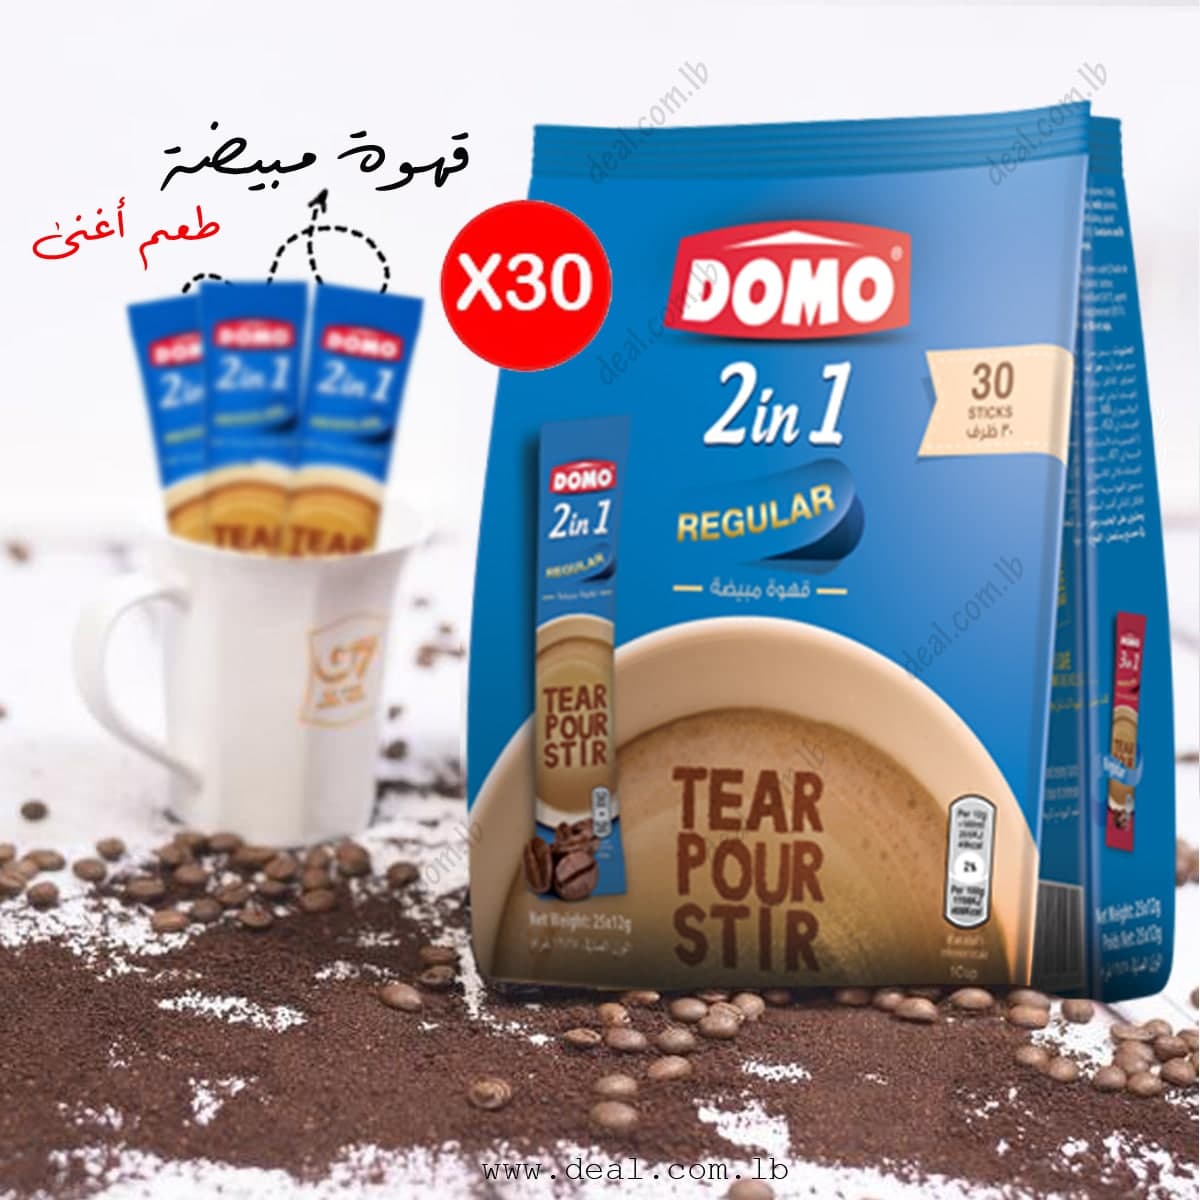 DOMO+INSTANT+COFFEE+2+IN+1+30pcs+12G